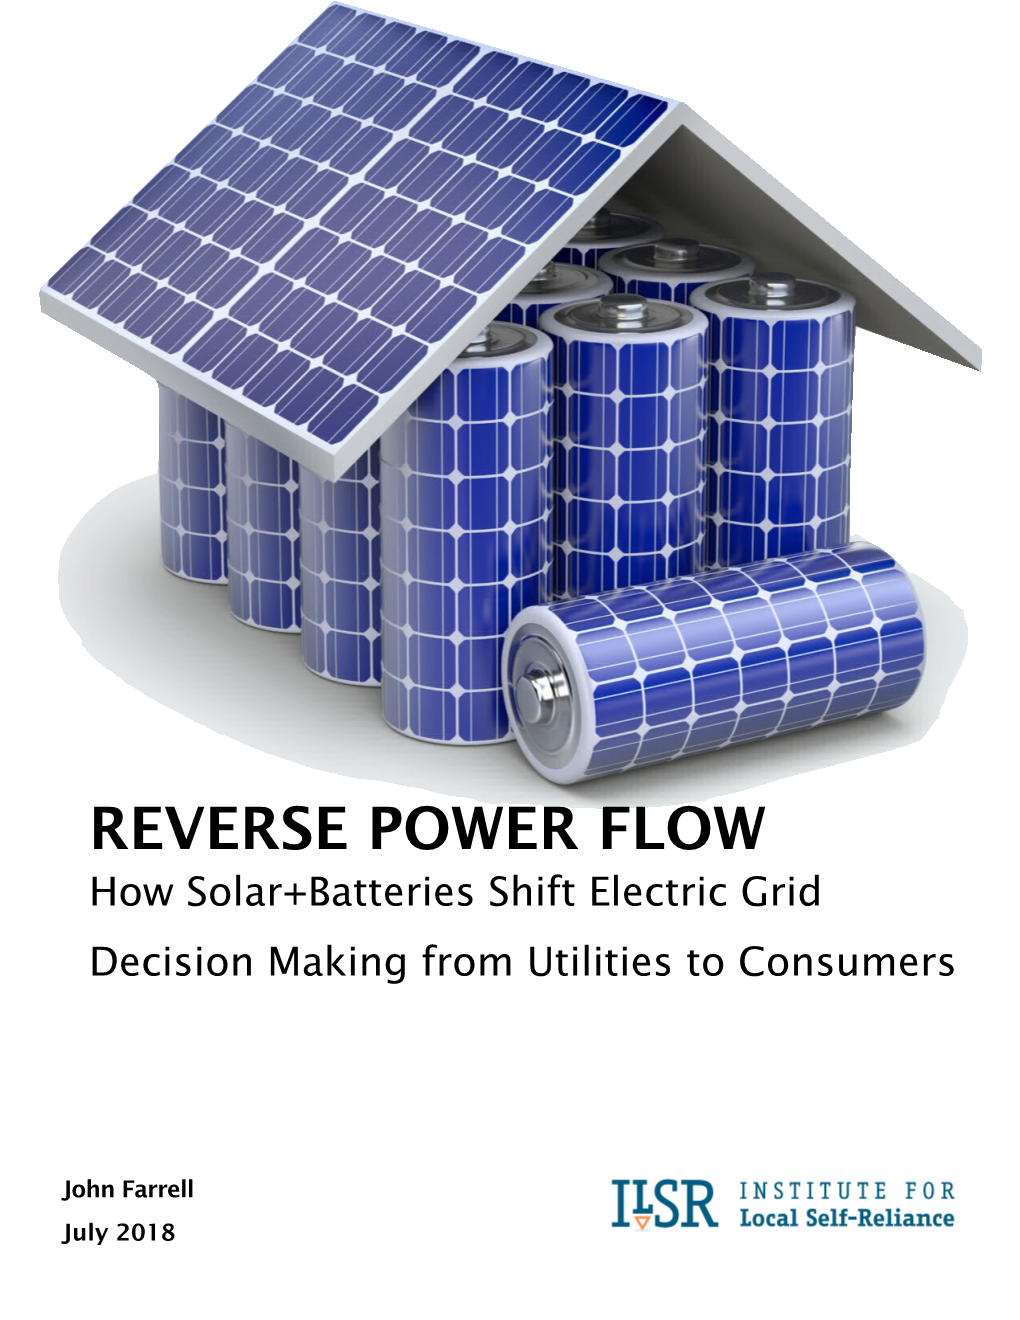 REVERSE POWER FLOW How Solar+Batteries Shift Electric Grid Decision Making from Utilities to Consumers